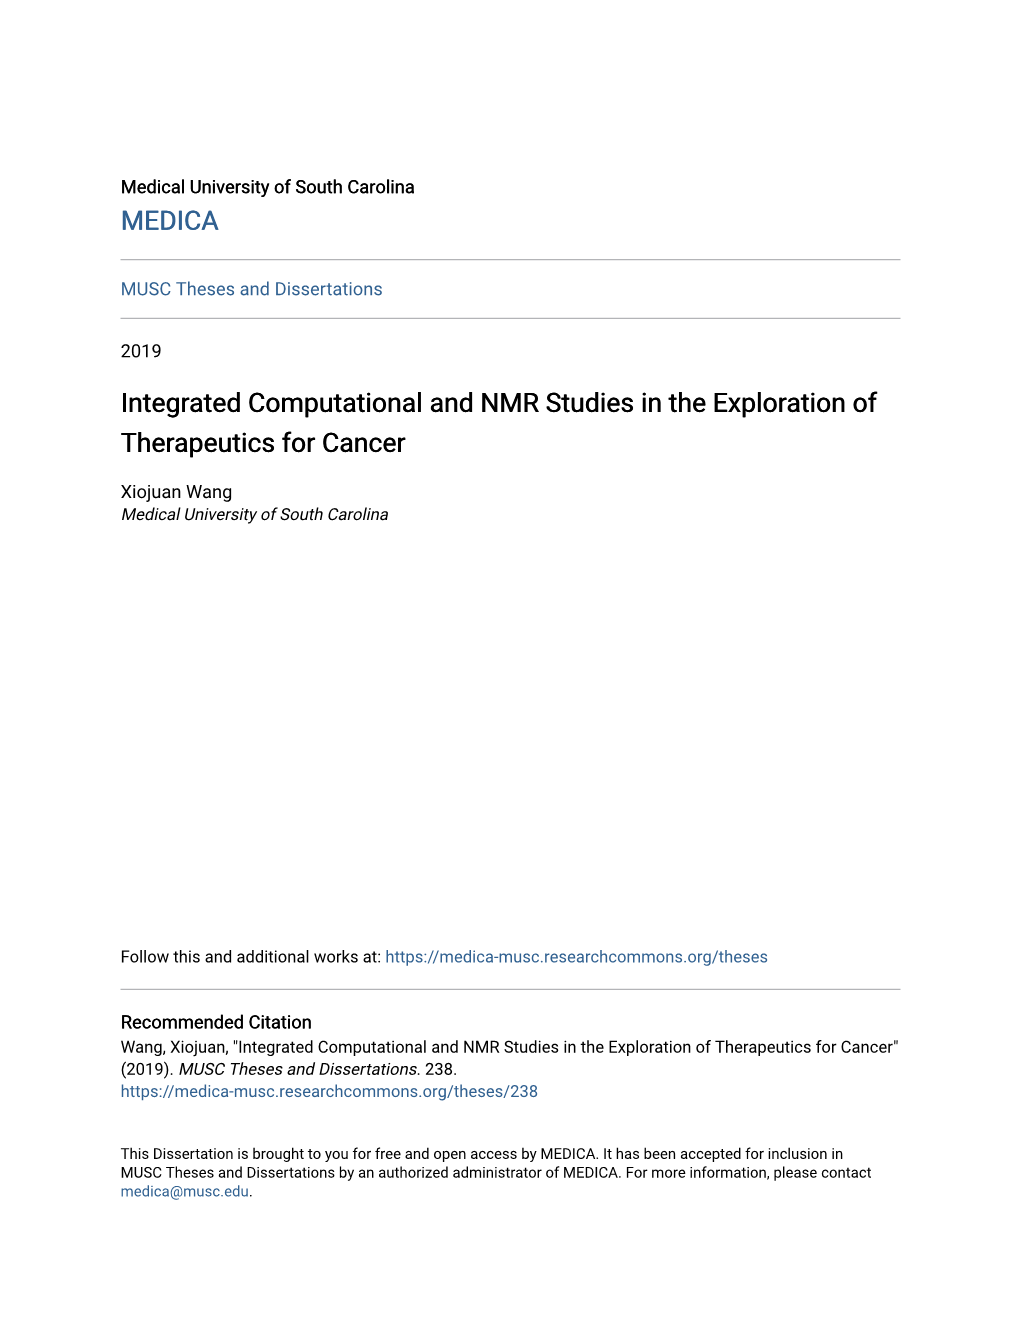 Integrated Computational and NMR Studies in the Exploration of Therapeutics for Cancer